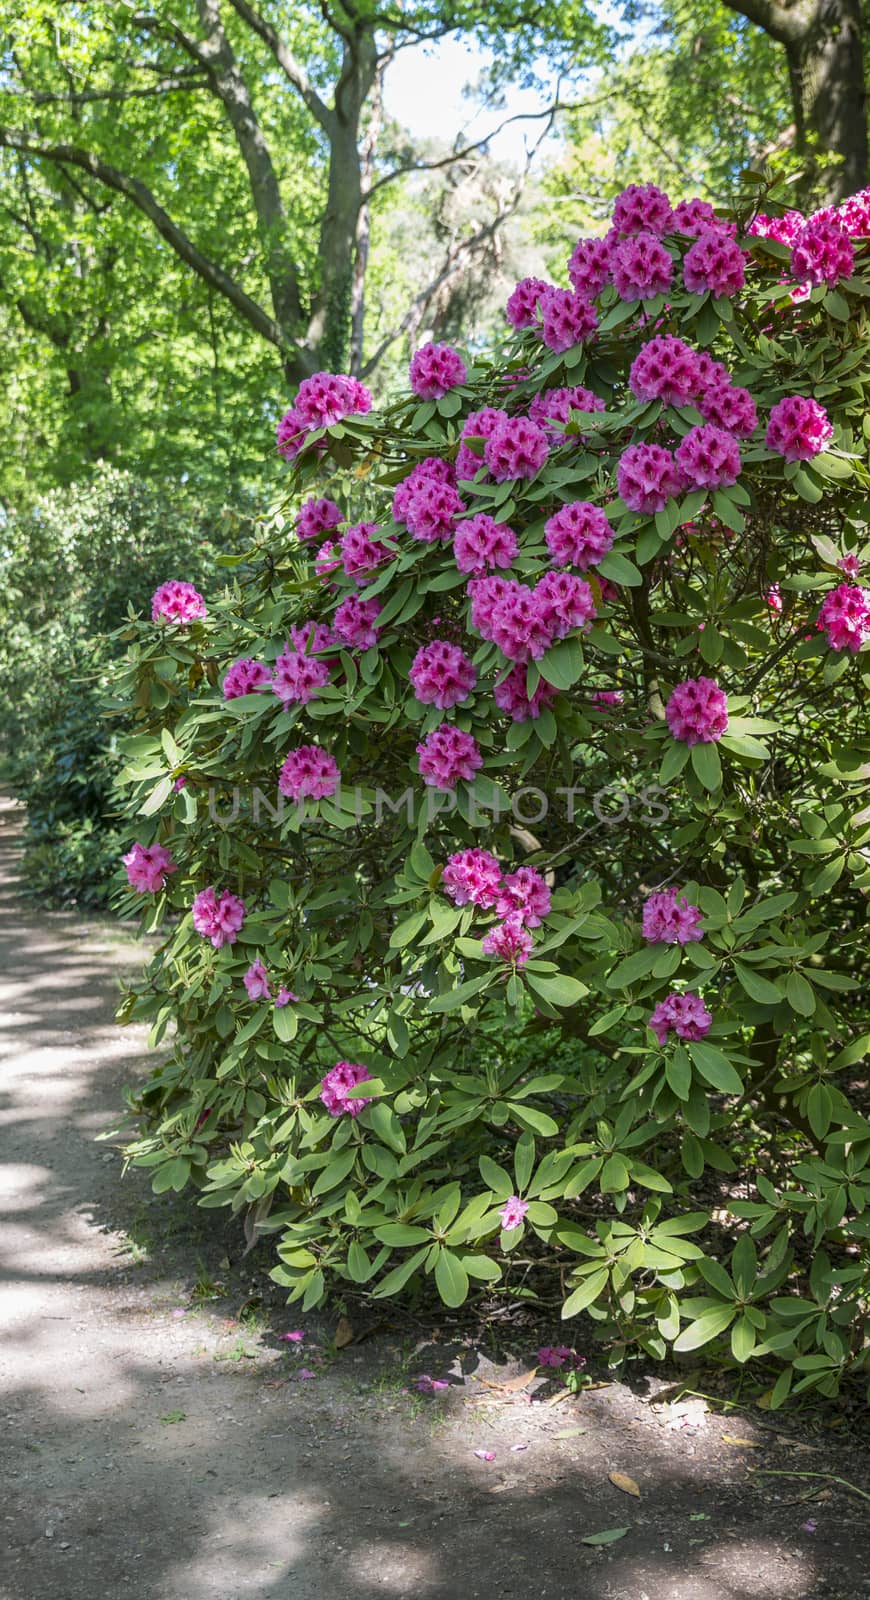 pink azalea and rhododendron flowers in the public park park of Clingendael in the hague in Holland